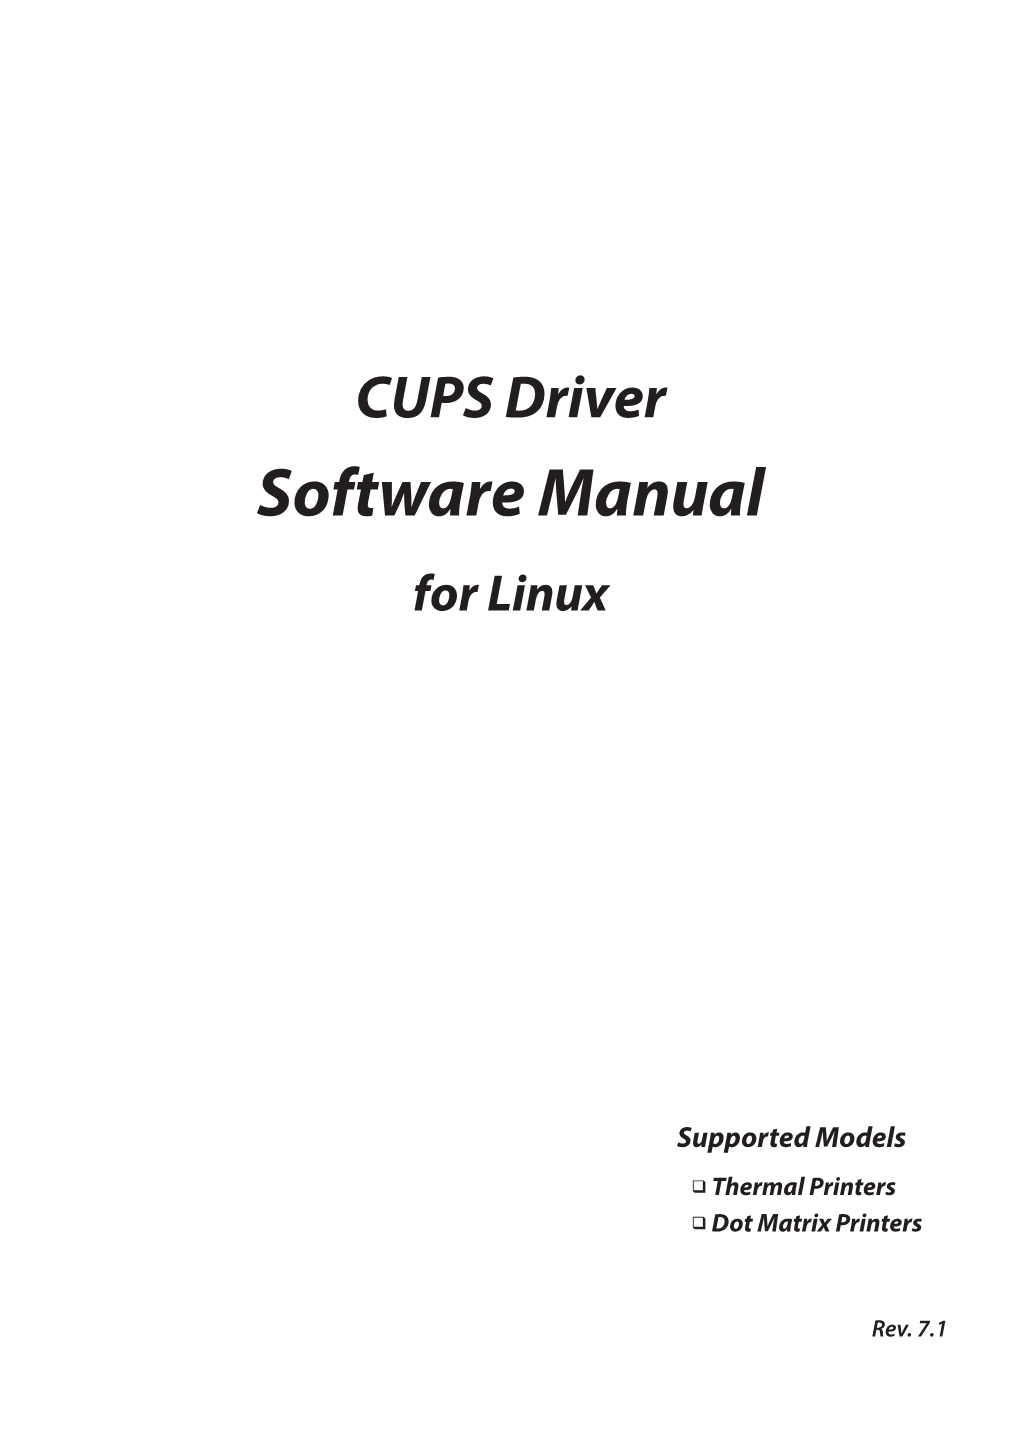 Linux CUPS Driver Software Manual